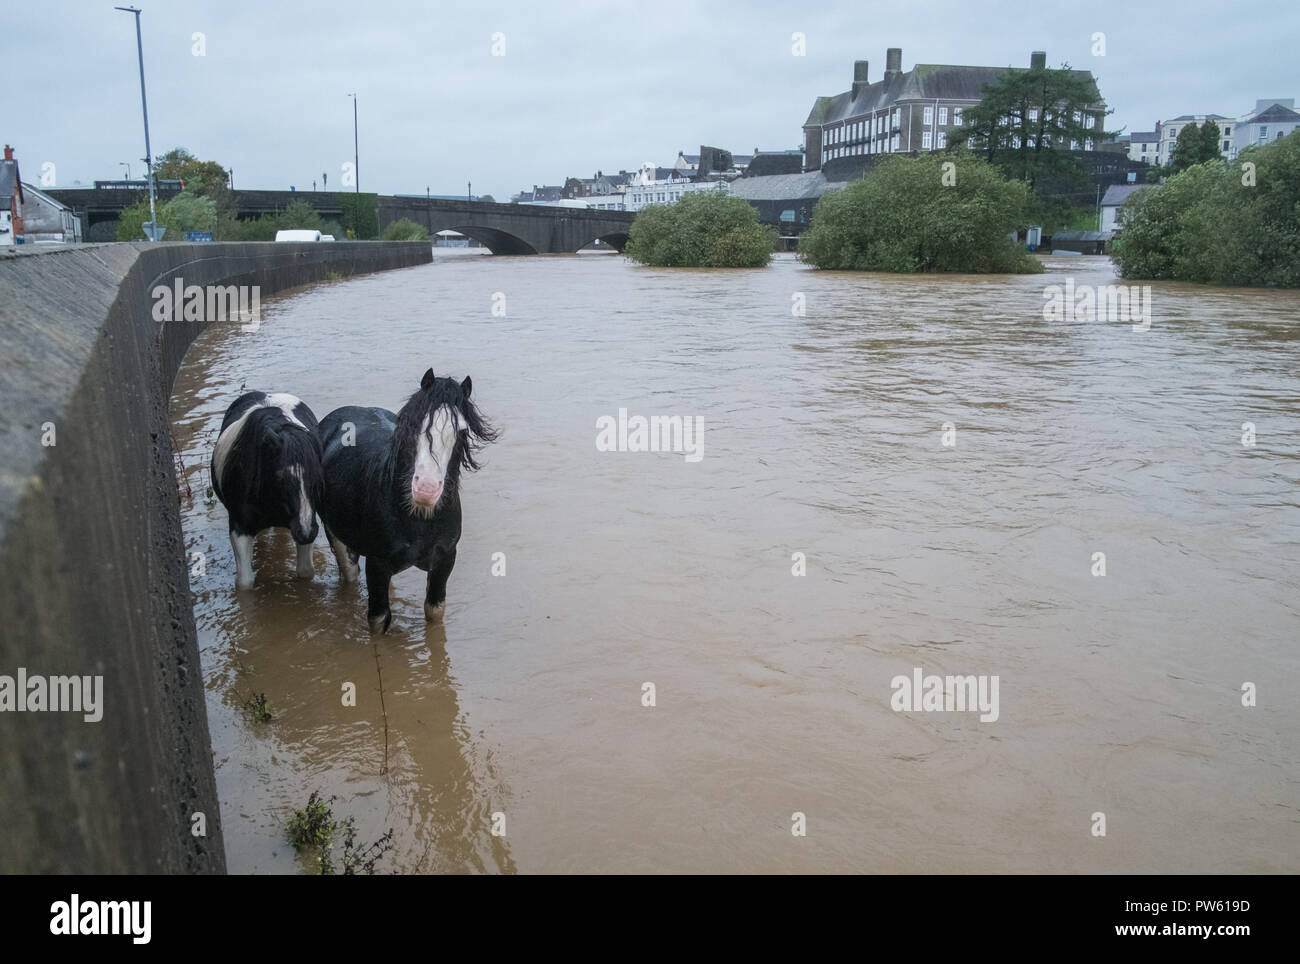 Carmarthen, Wales, UK. 13th October, 2018. UK weather. Two horses are stranded on the banks of the river Towy, Carmarthen, south Wales. The combination of high tide with heavy rain and high winds by Storm Callum causes the river Towy to flood low lying areas. Credit: Algis Motuza/Alamy Live News Stock Photo